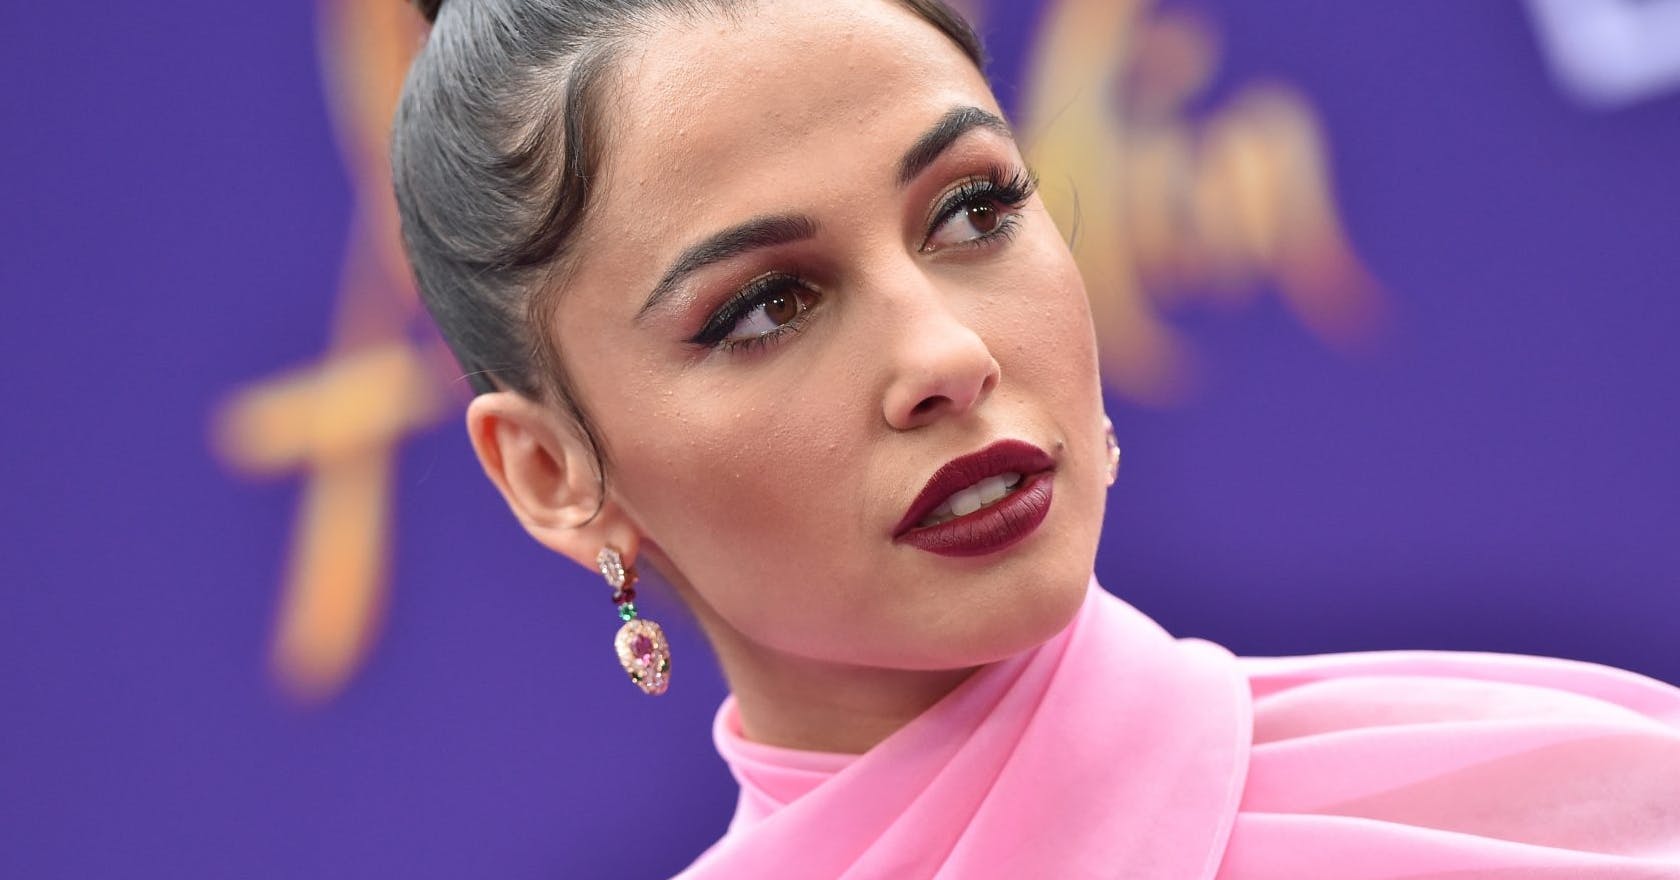 Naomi Scott has some inspiring words for anyone thinking about switching careers